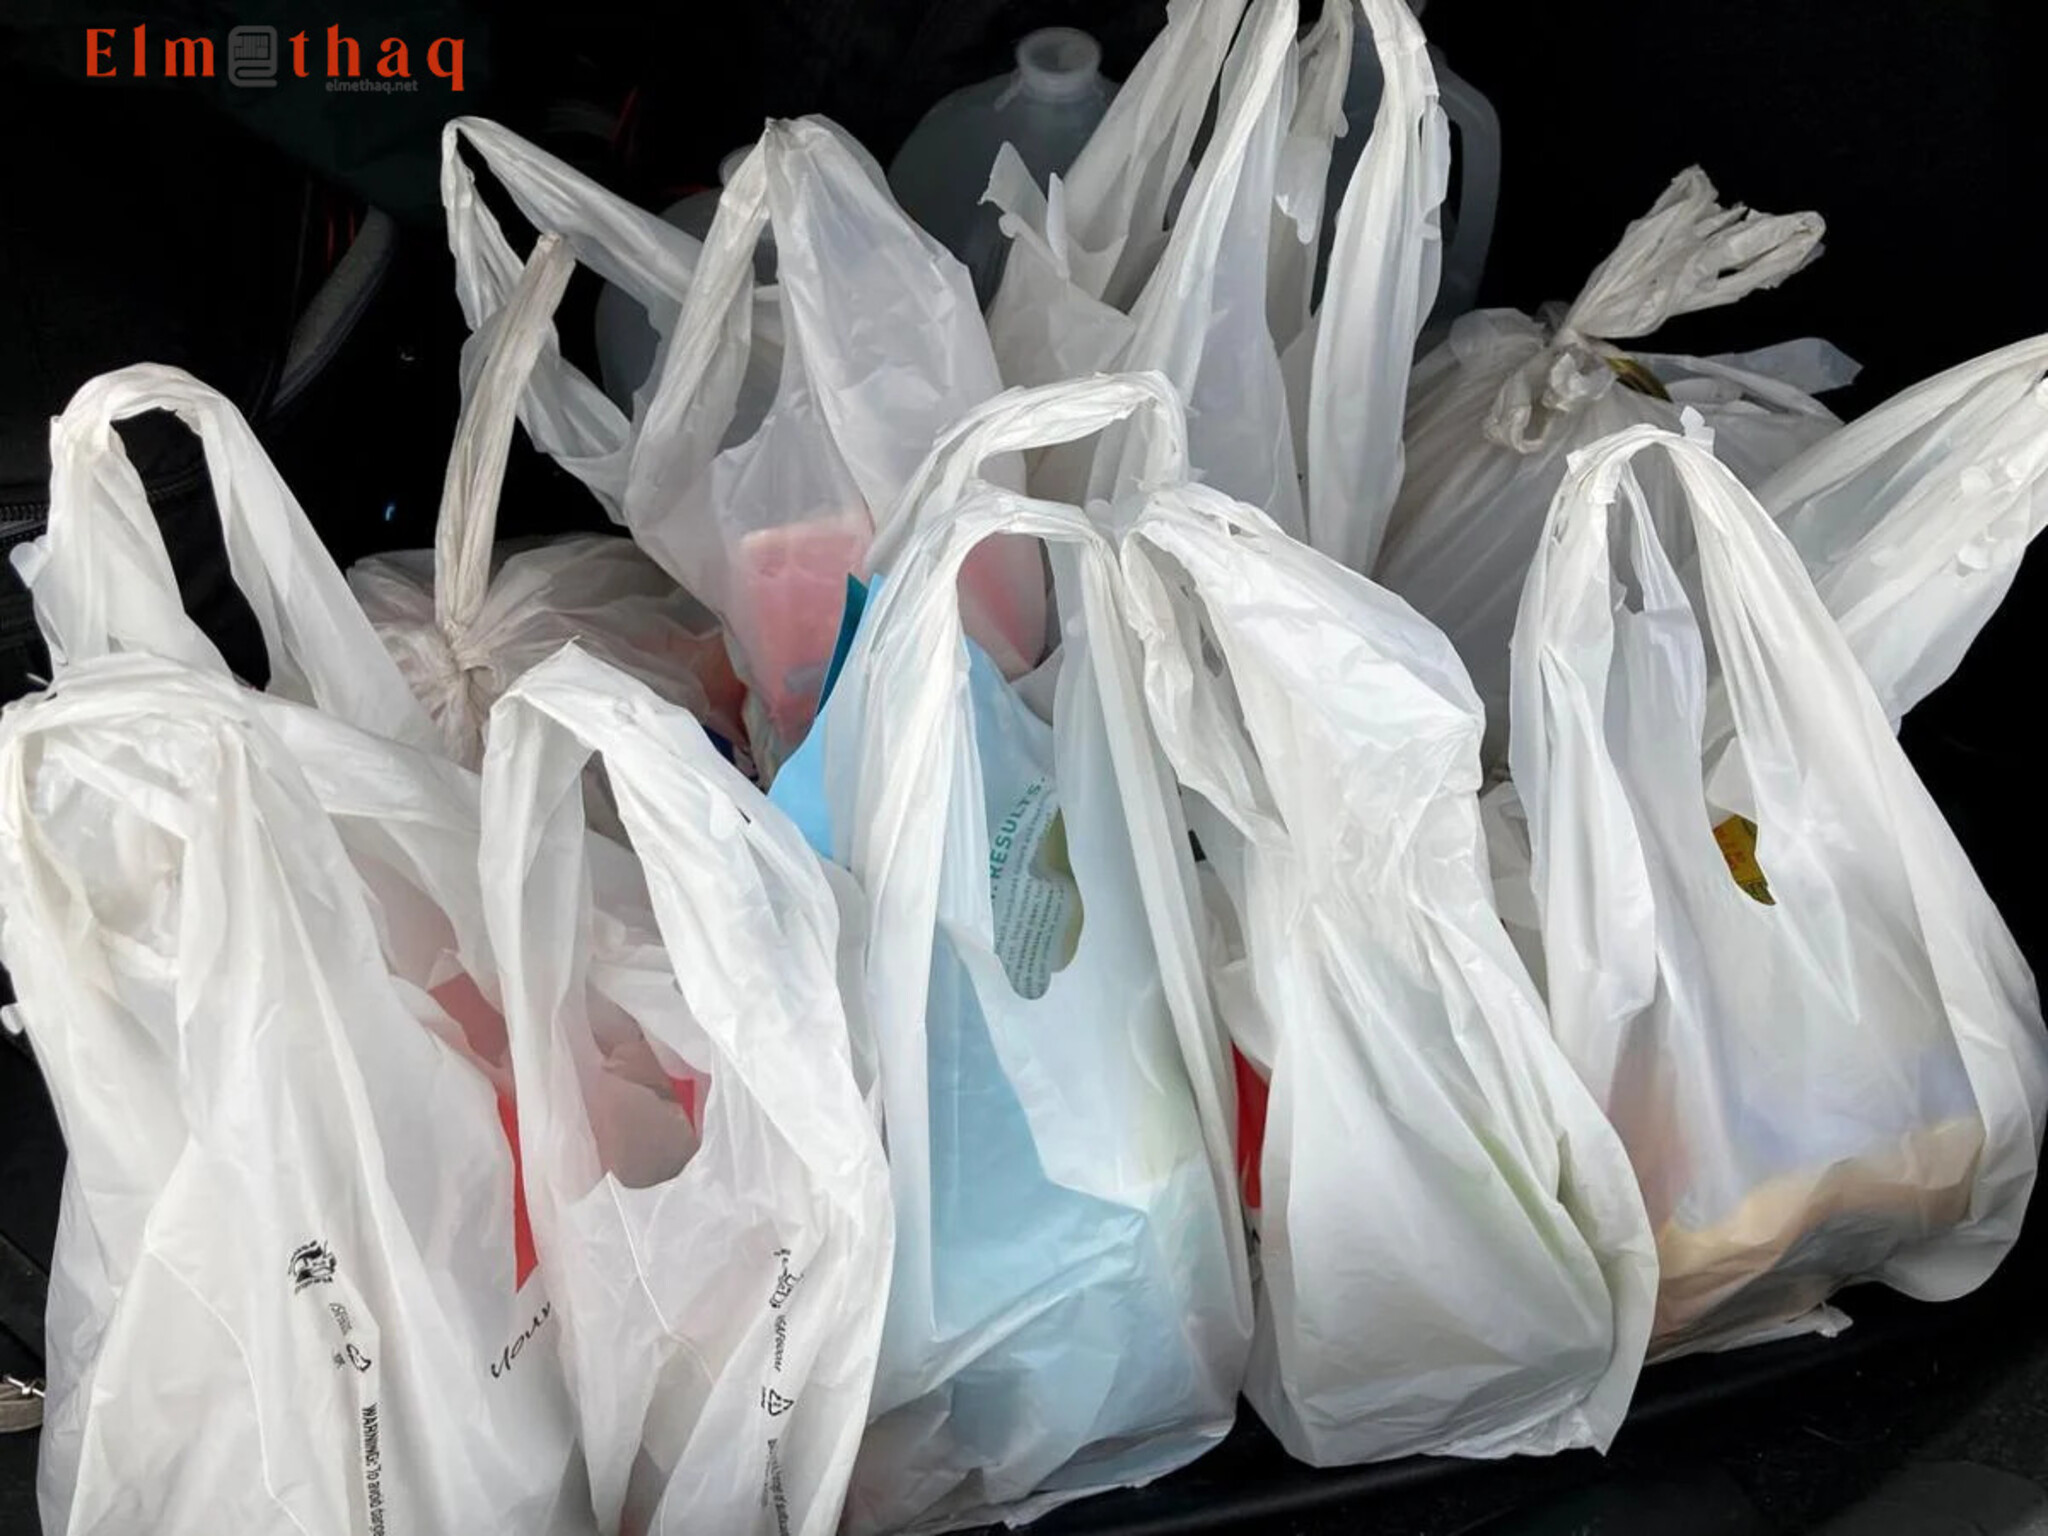 Dubai announces ban on single-use bags from June 1; fines, exemptions revealed